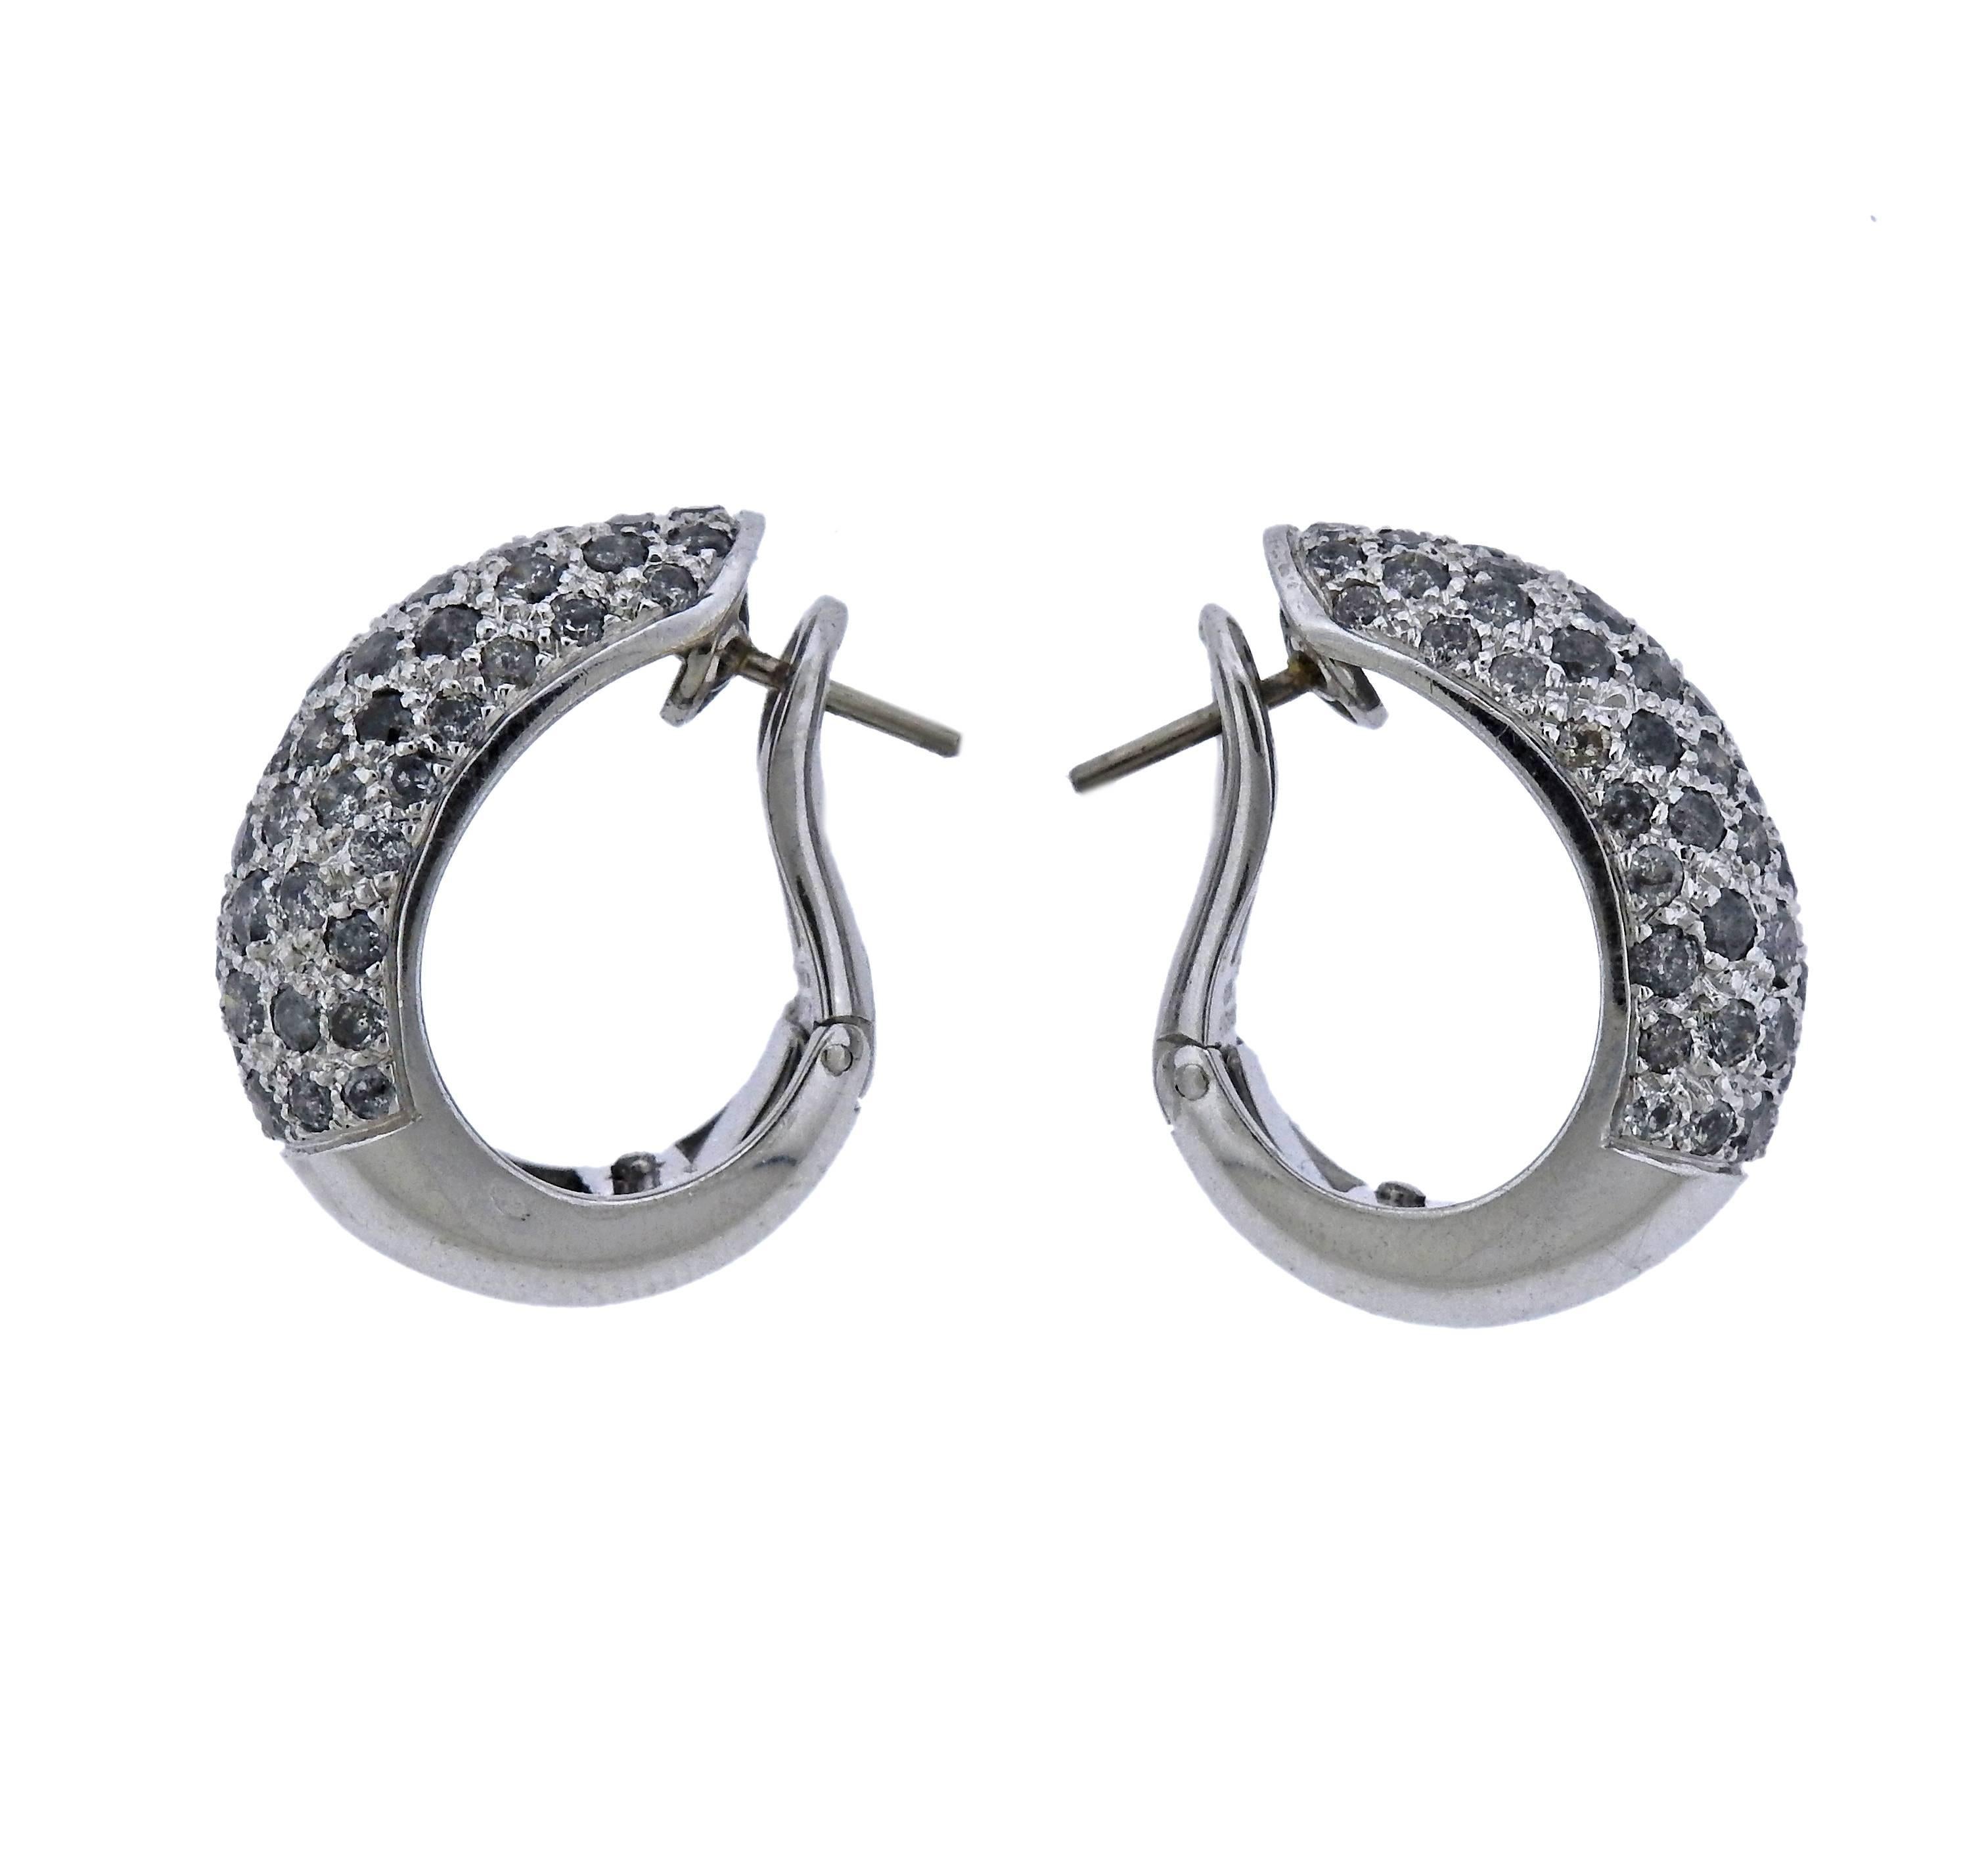 Pair of Cartier Sauvage 18k gold hoop earrings, crafted in circa 1990s, set with approx. 2.50ctw in diamonds. Earrings are 22mm x 10mm, weigh 15.7 grams. Marked: Cartier, 1999, 750, H86032. 